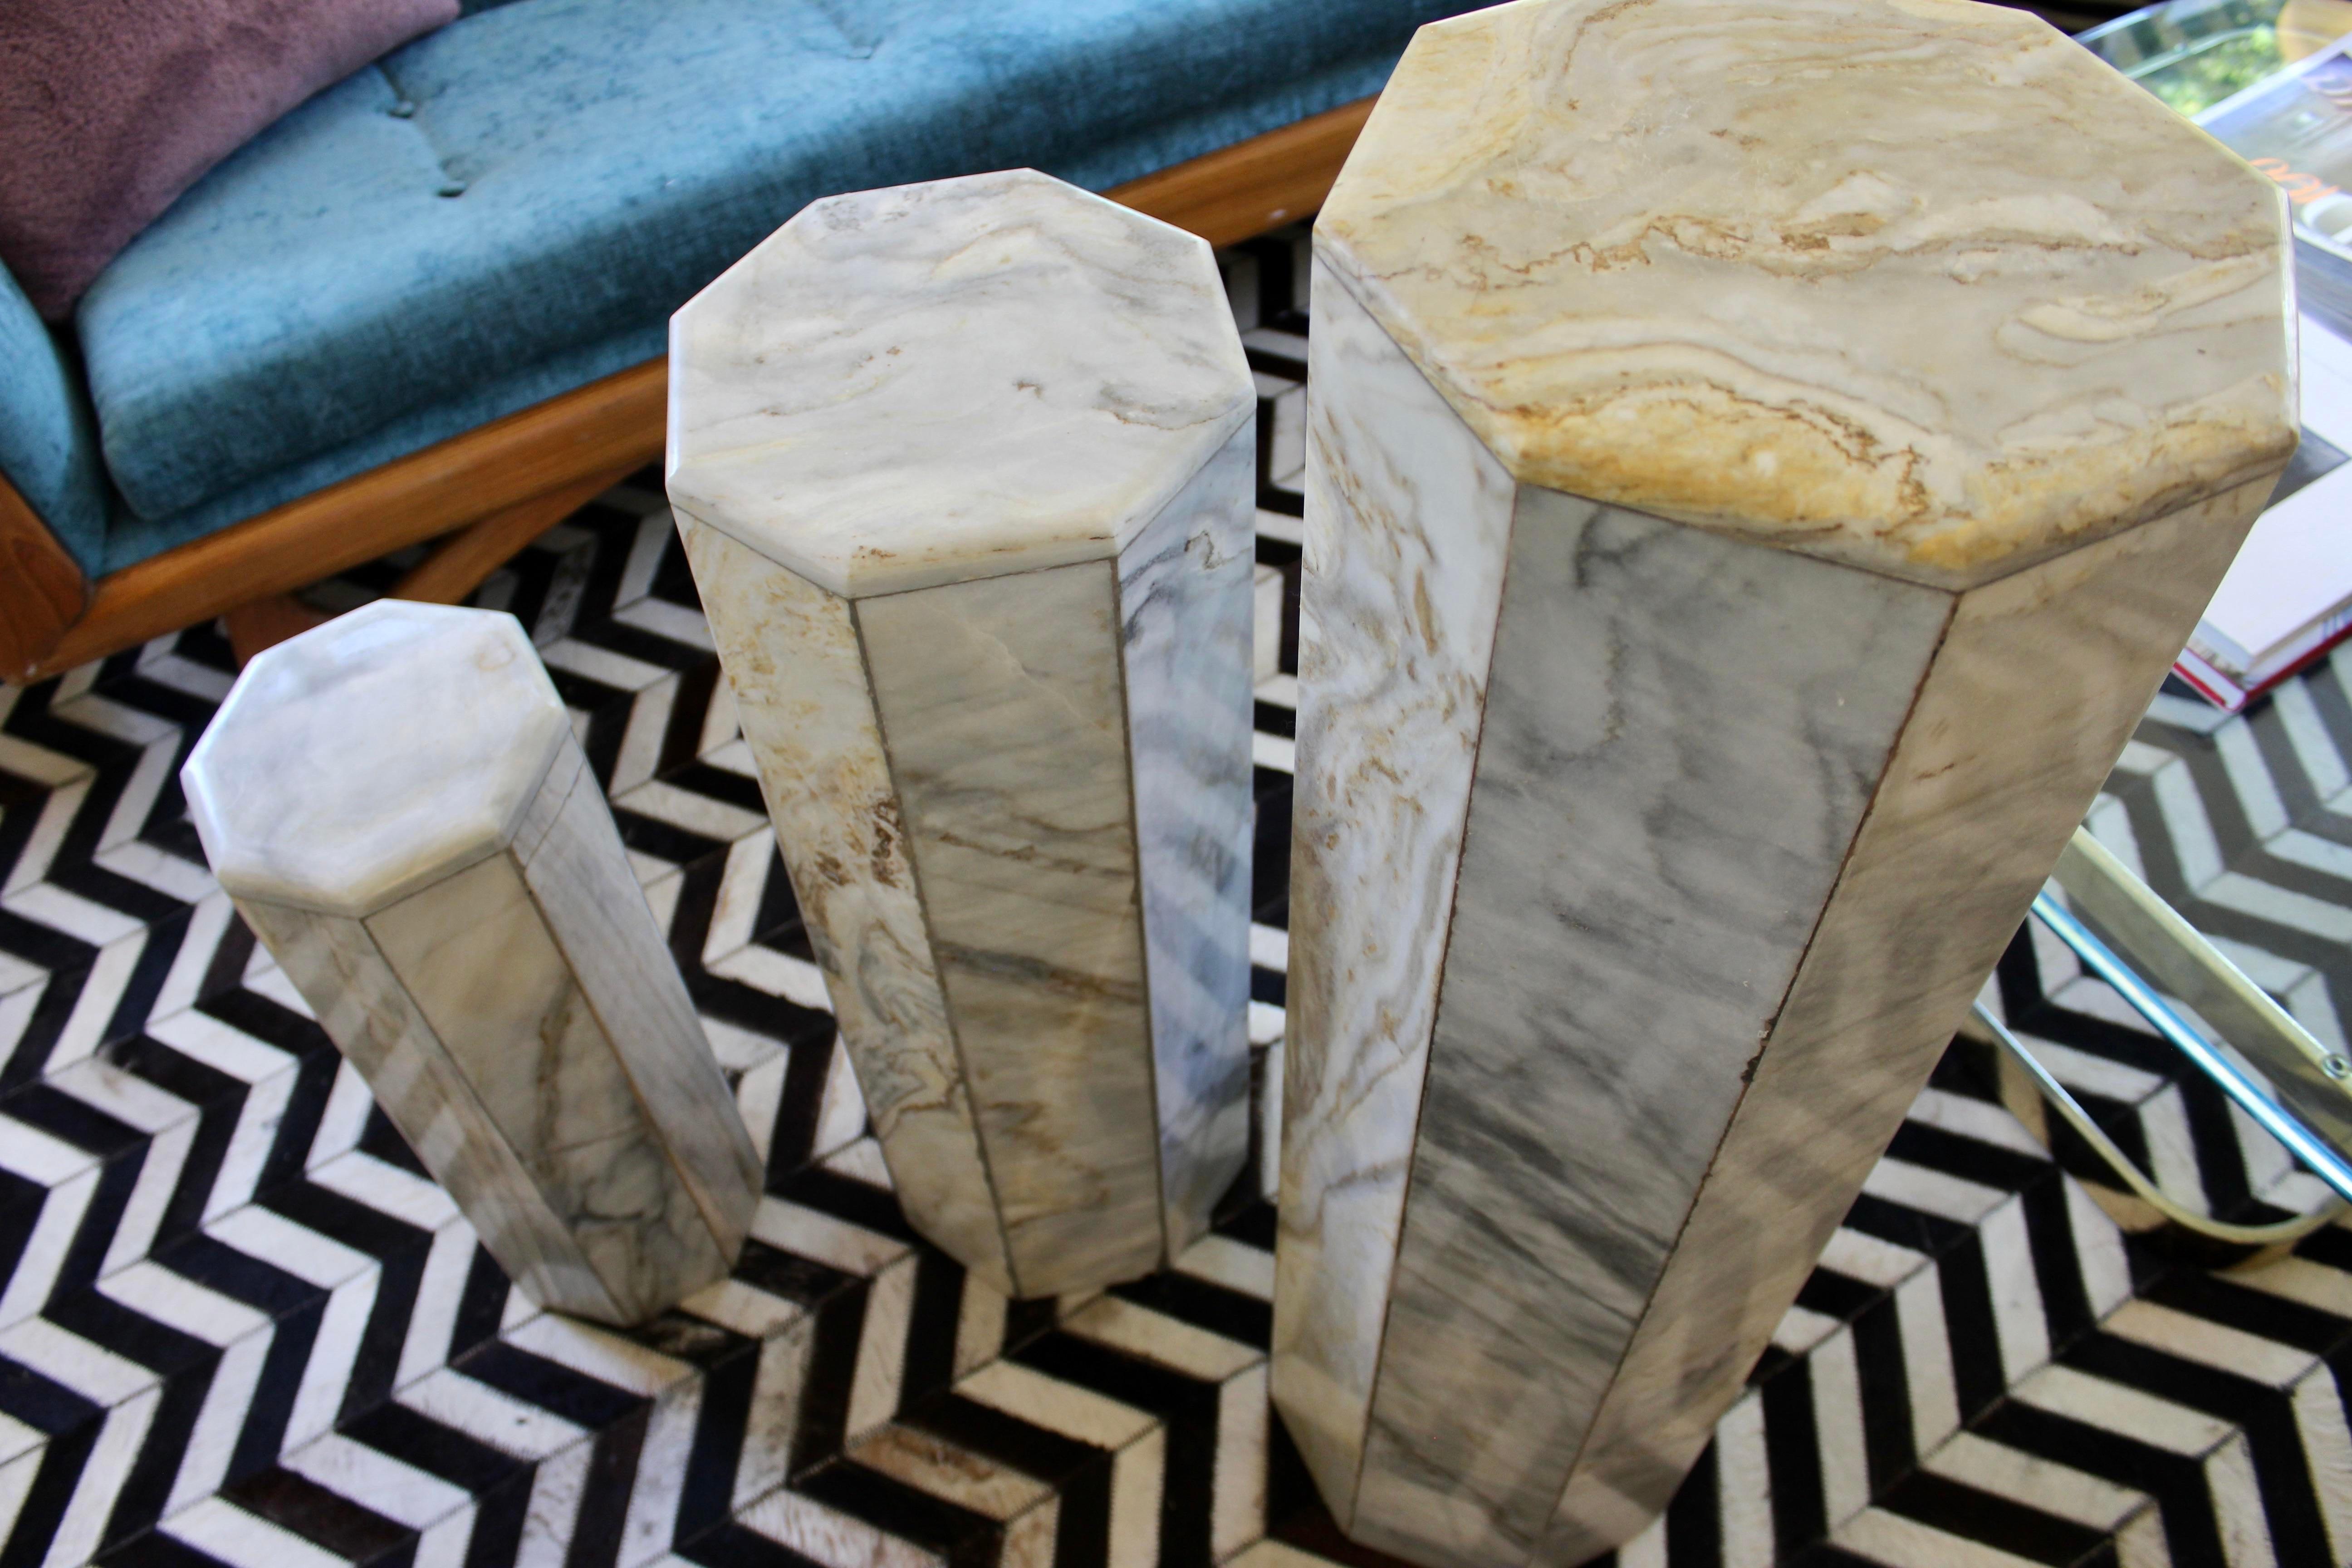 Set of 3 Italian marble hexagonal pedestals from the 1970s. This stylish three piece set of Italian Picasso marble pedestals will make a statement as a group and can be used individually. All edges flow smoothly into the next. The color is Picasso